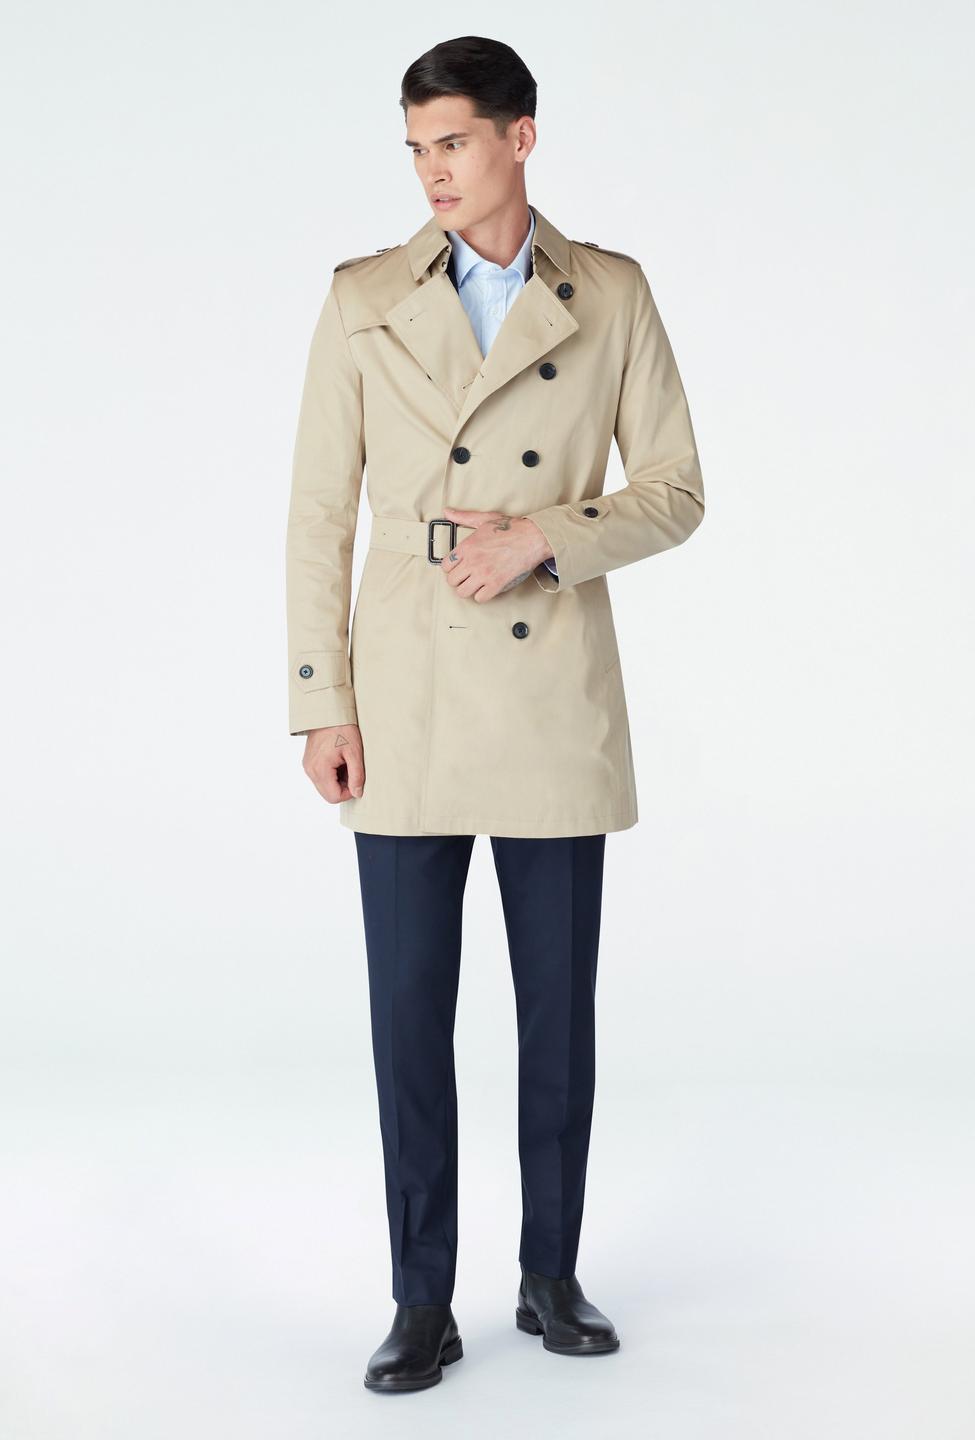 Brown trenchcoat - Solid Design from Indochino Collection